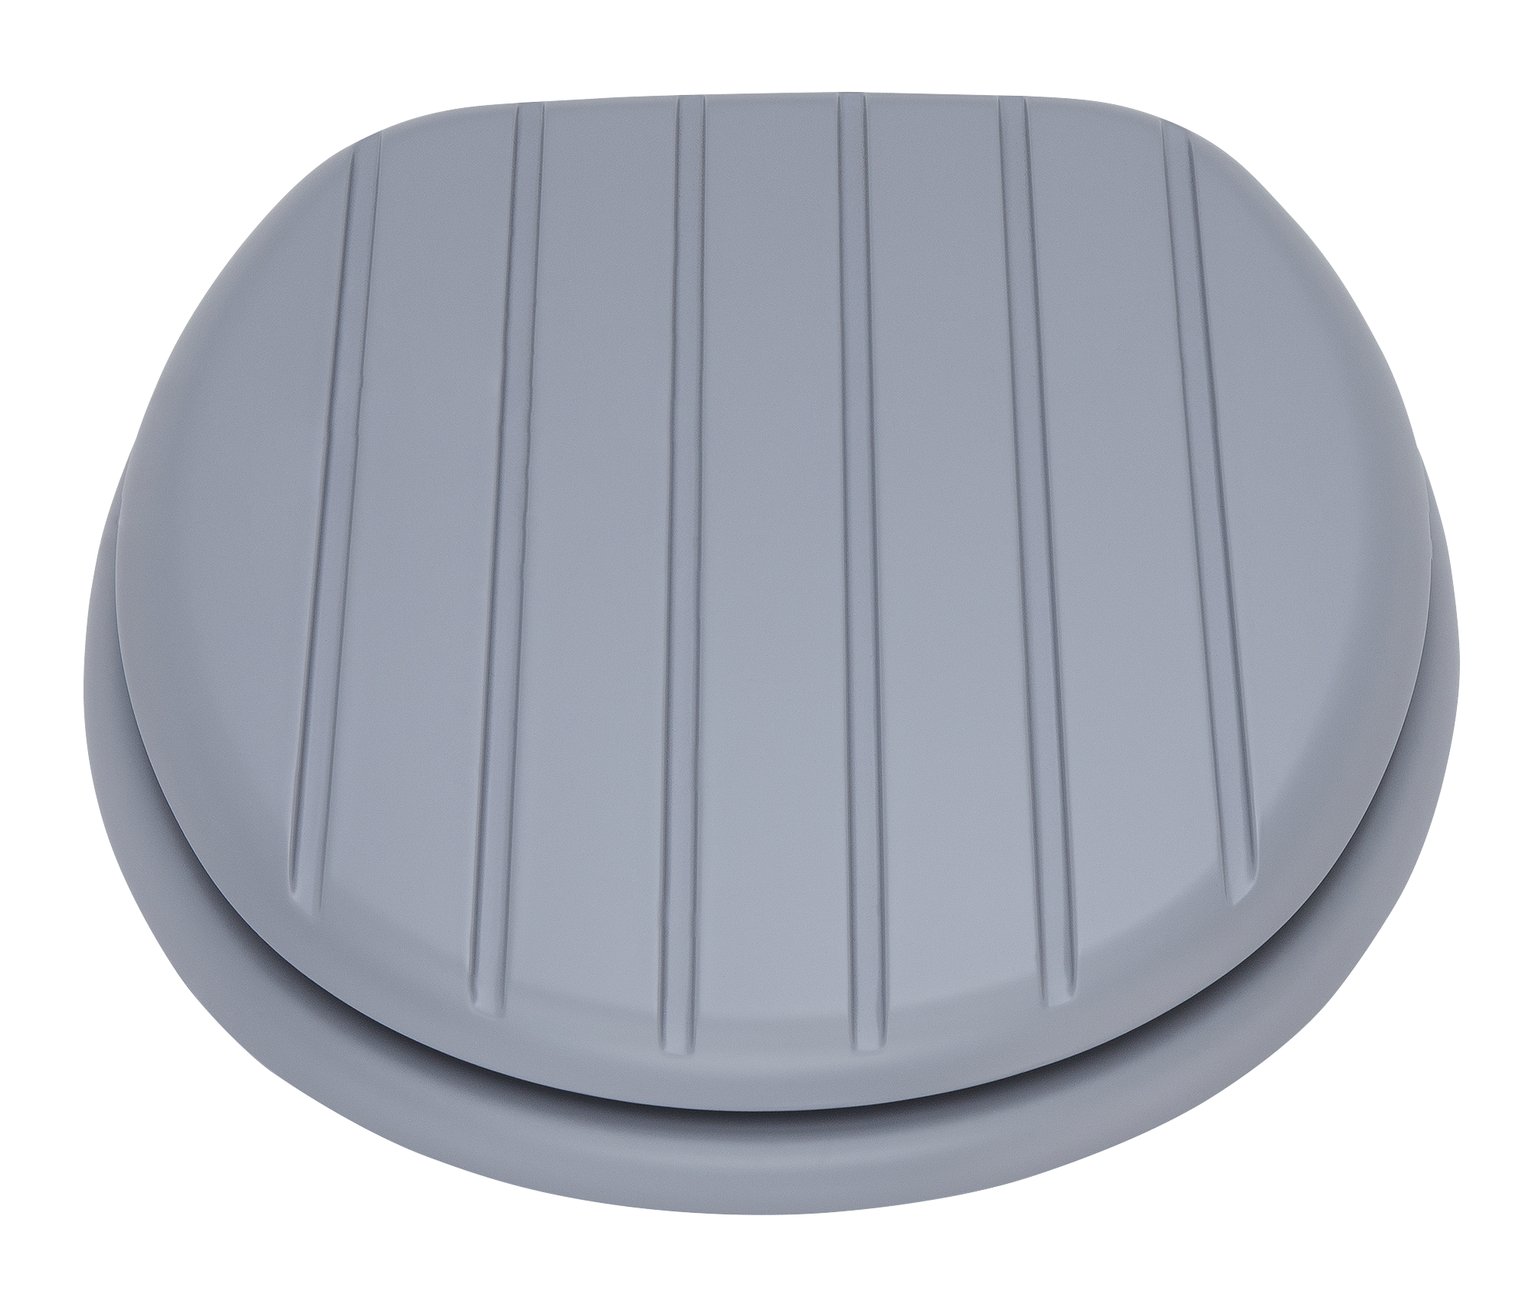 Argos Home Tongue and Groove Style Toilet Seat - Grey